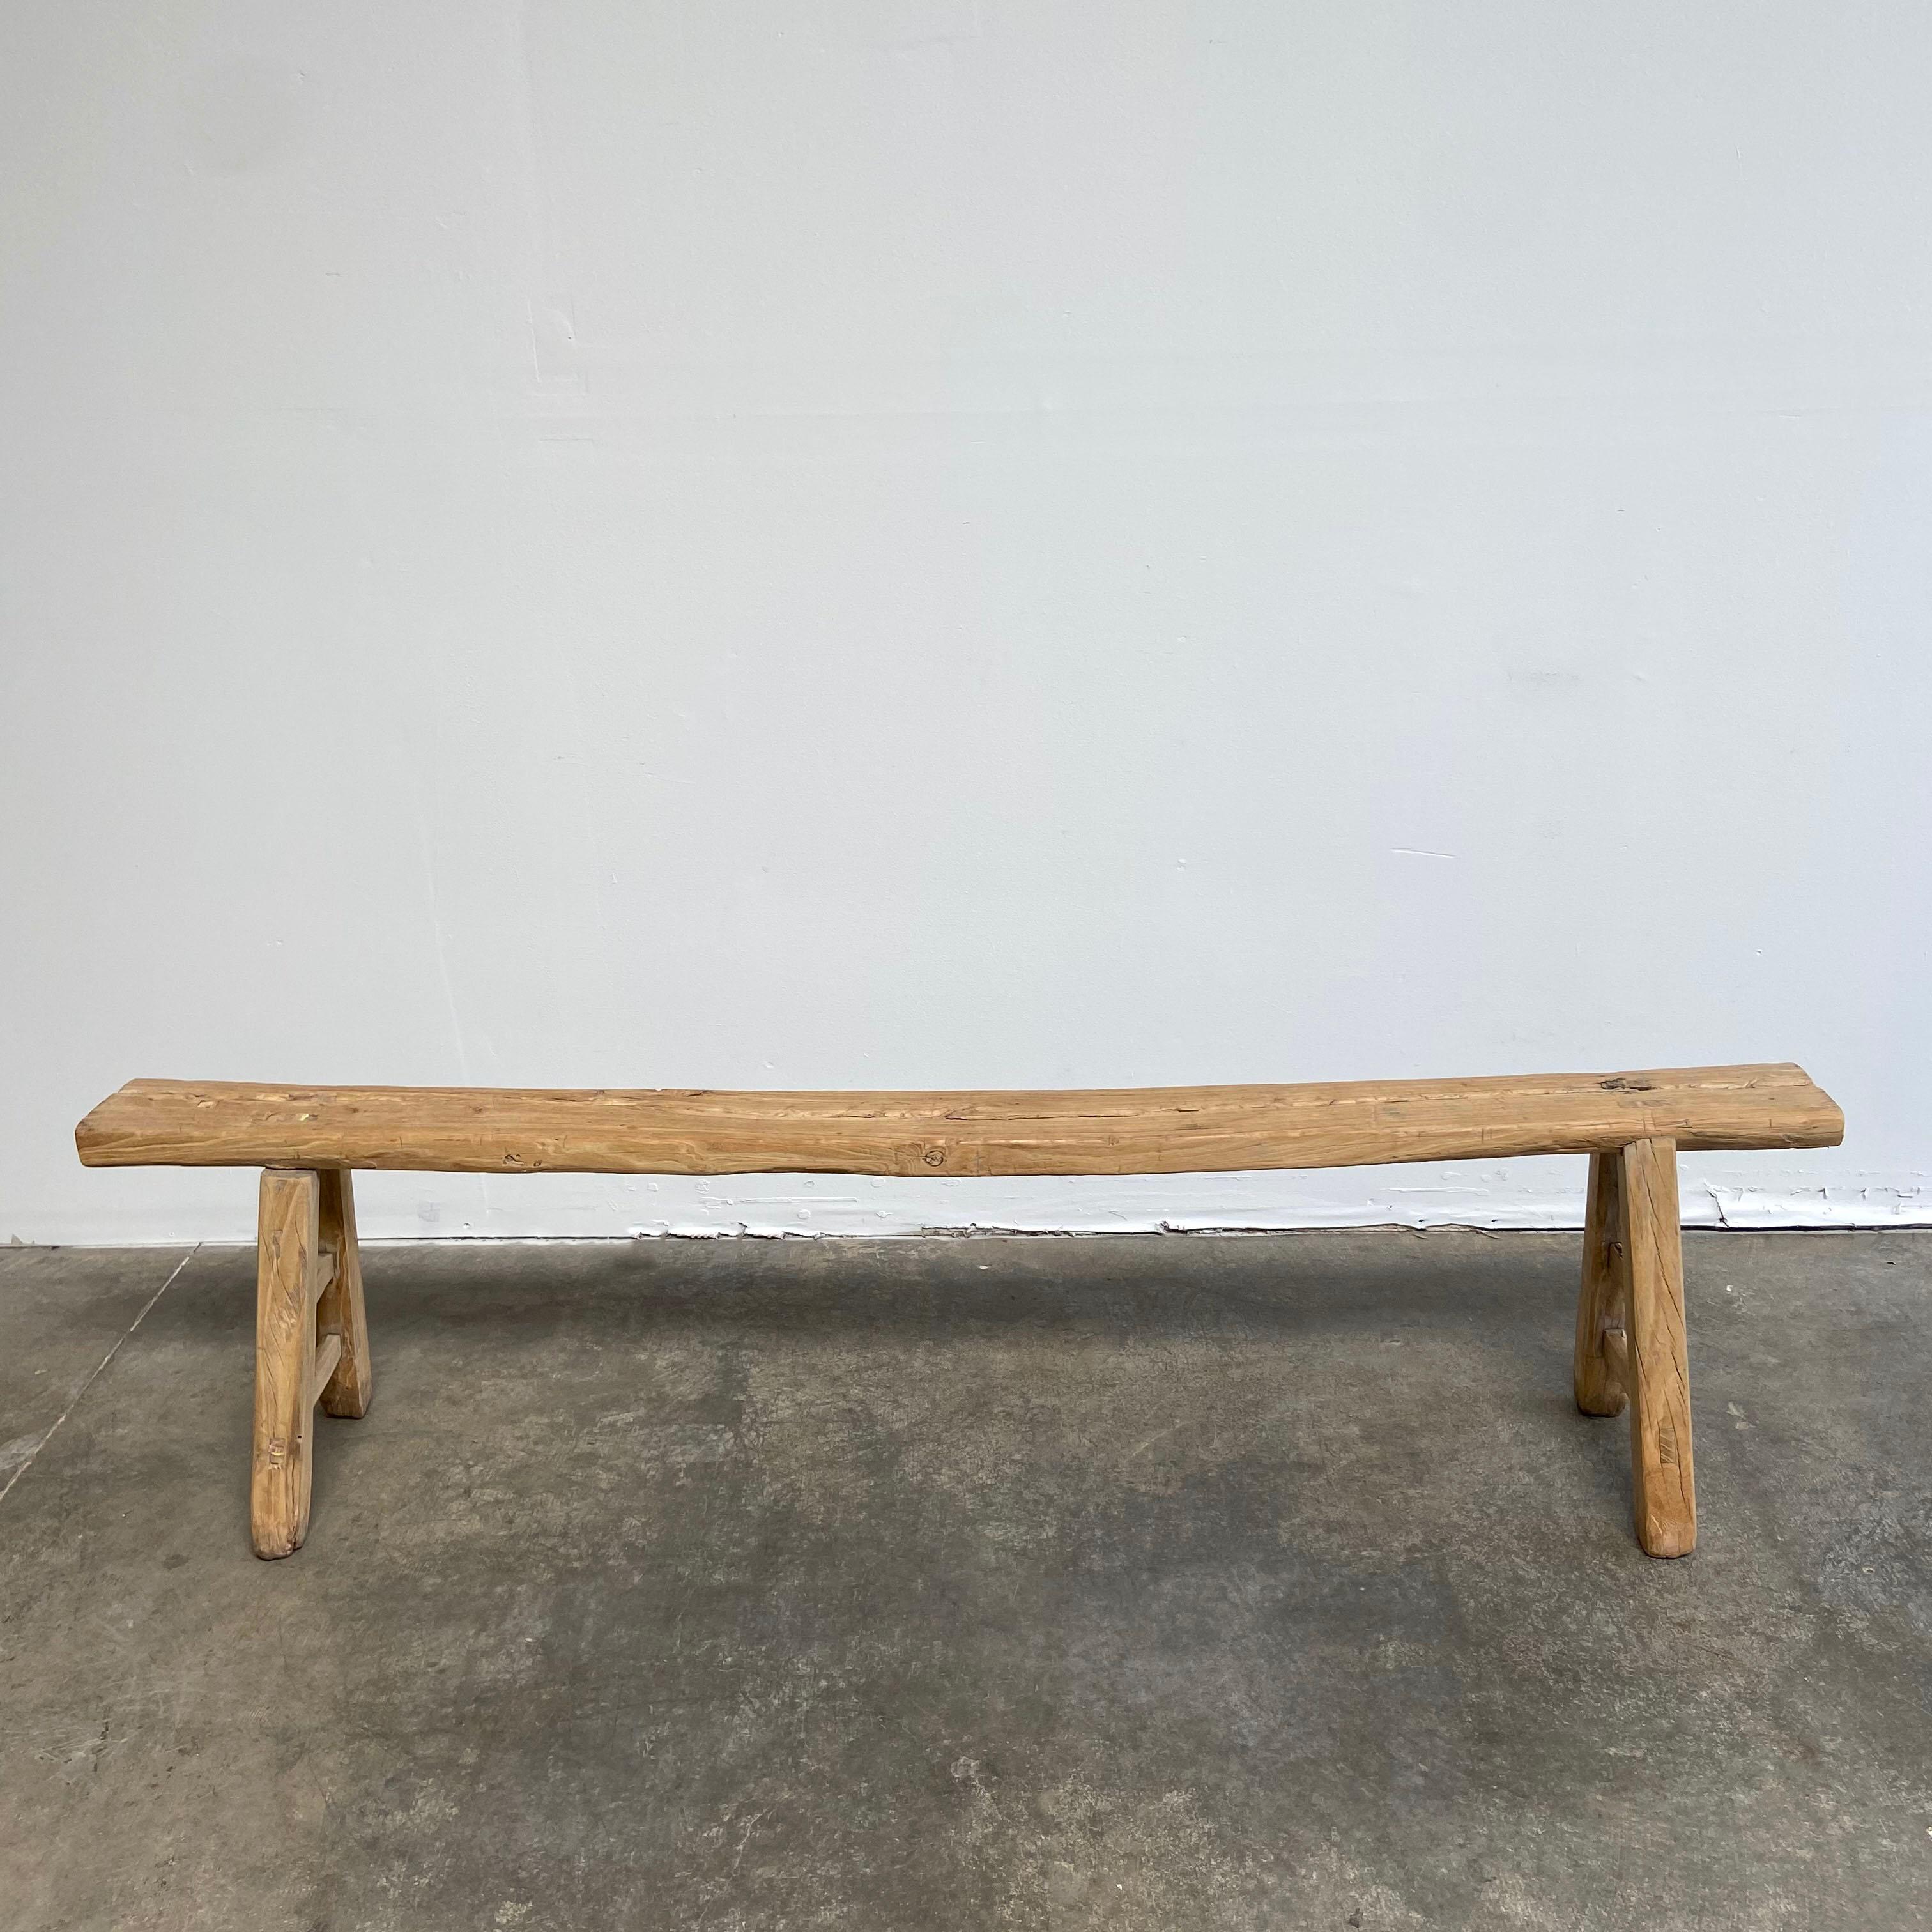 Vintage antique elm wood bench
These are the real vintage antique elm wood benches! Beautiful antique patina, with weathering and age, these are solid and sturdy ready for daily use, use as as a table behind a sofa, stool, coffee table, they are